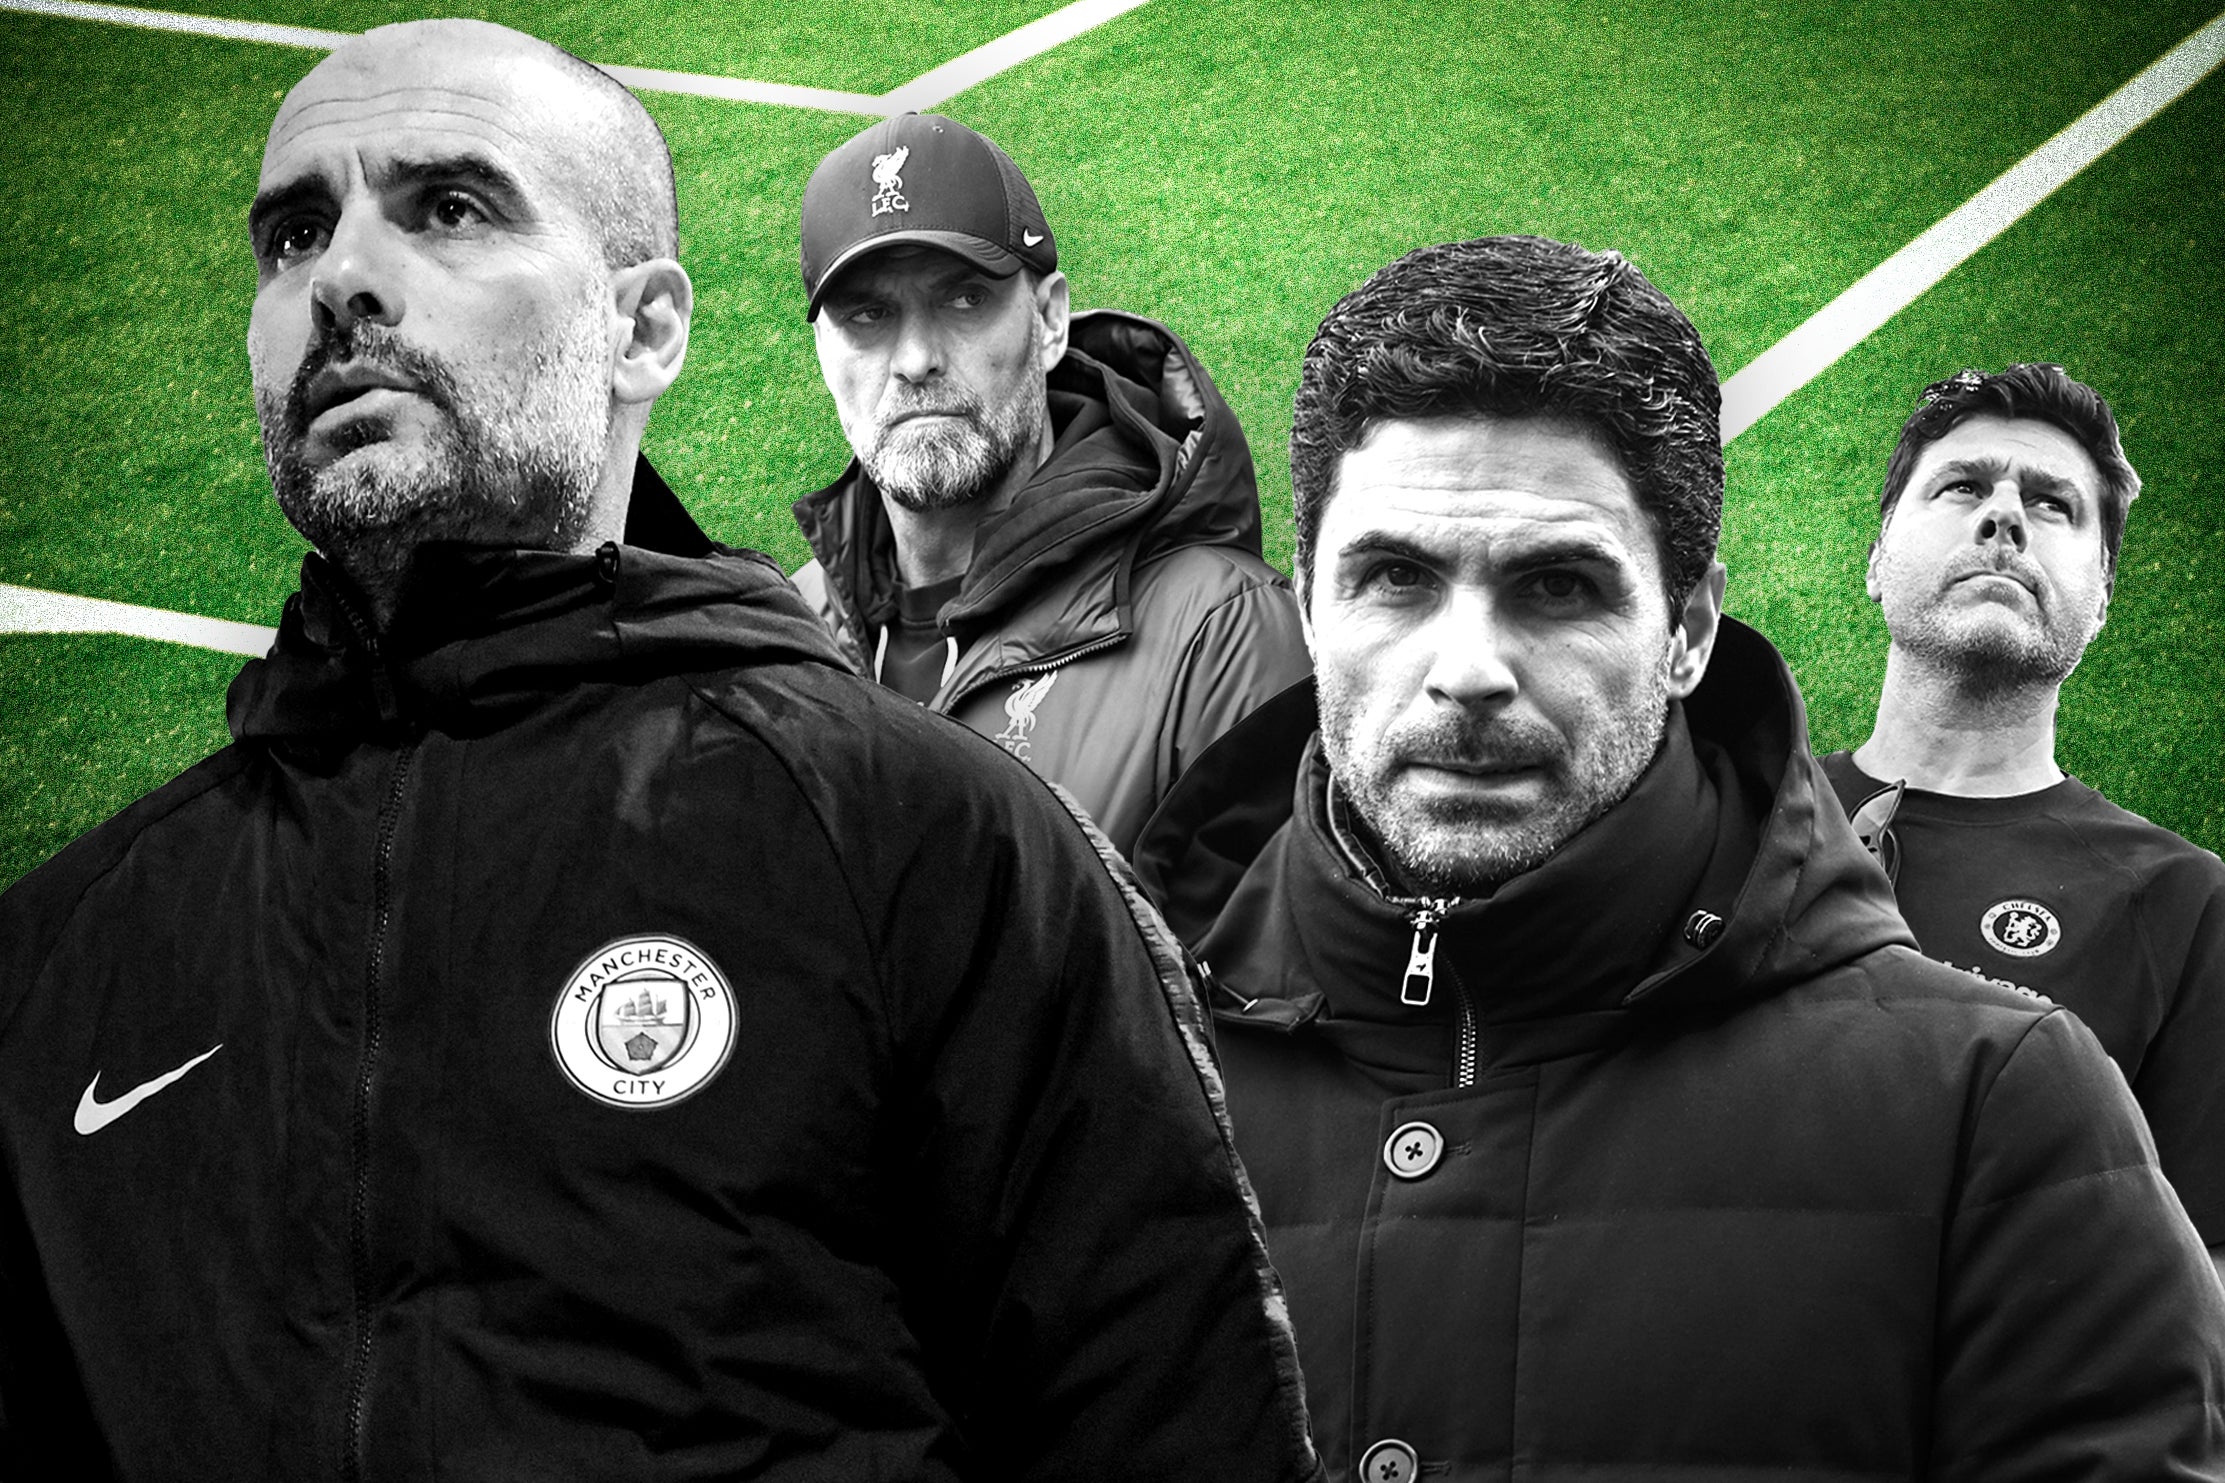 Eyes on the prize: the battle for Premier League supremacy will be all-consuming for Pep Guardiola, Jurgen Klopp, Mikel Arteta and Mauricio Pochettino